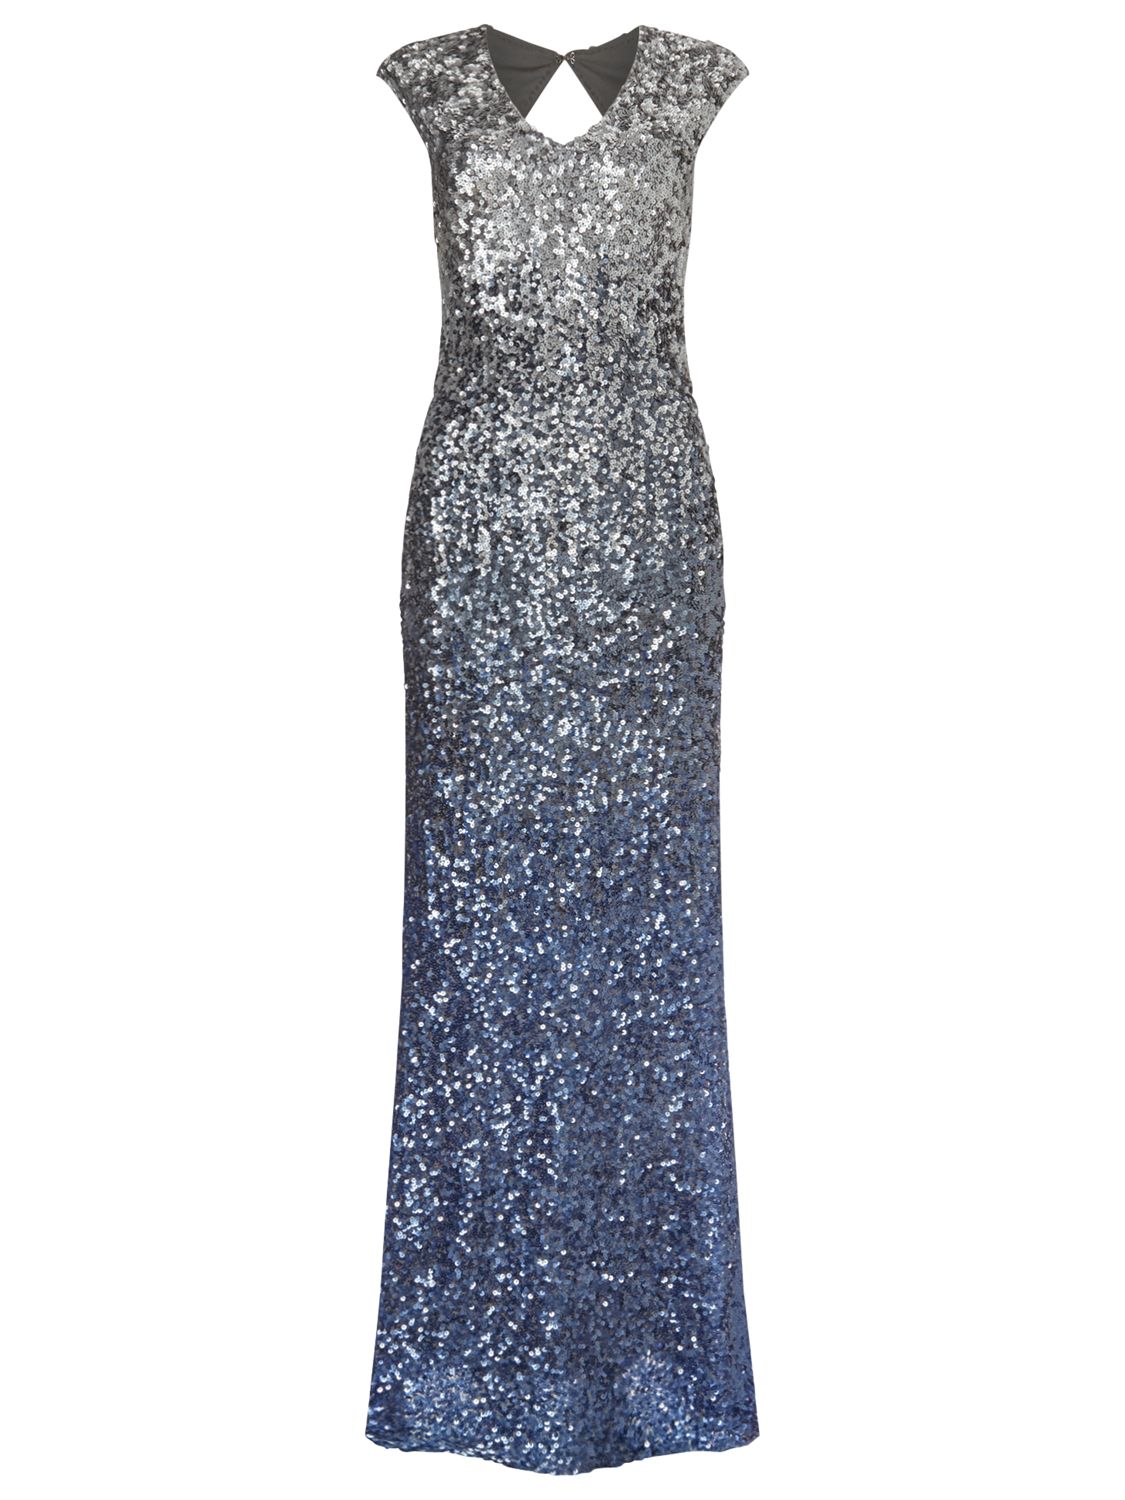 silver and blue sequin dress